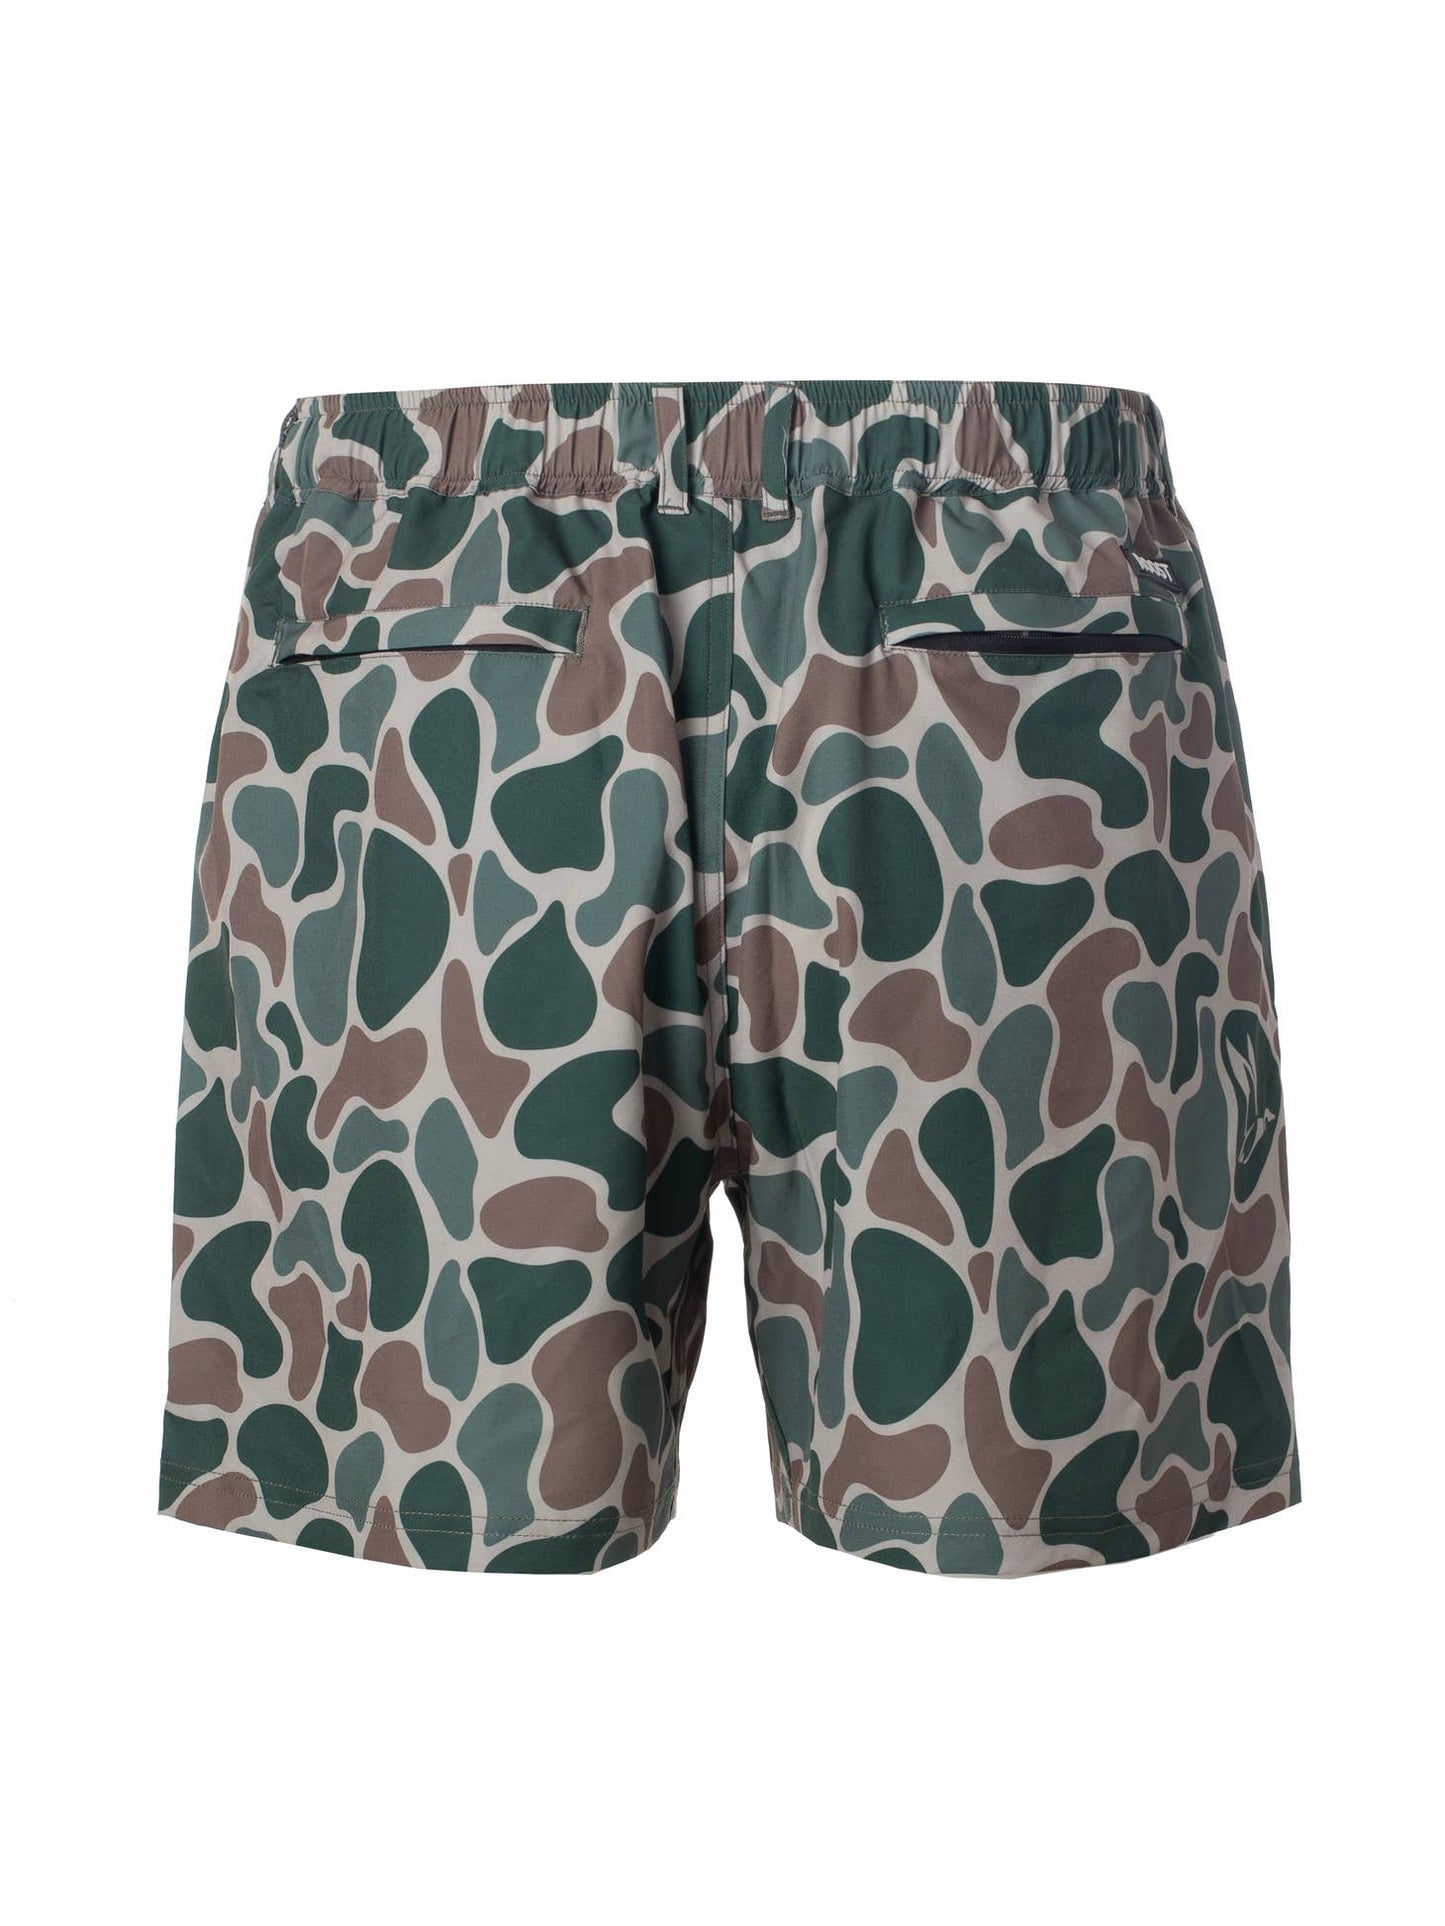 Roost Shorts